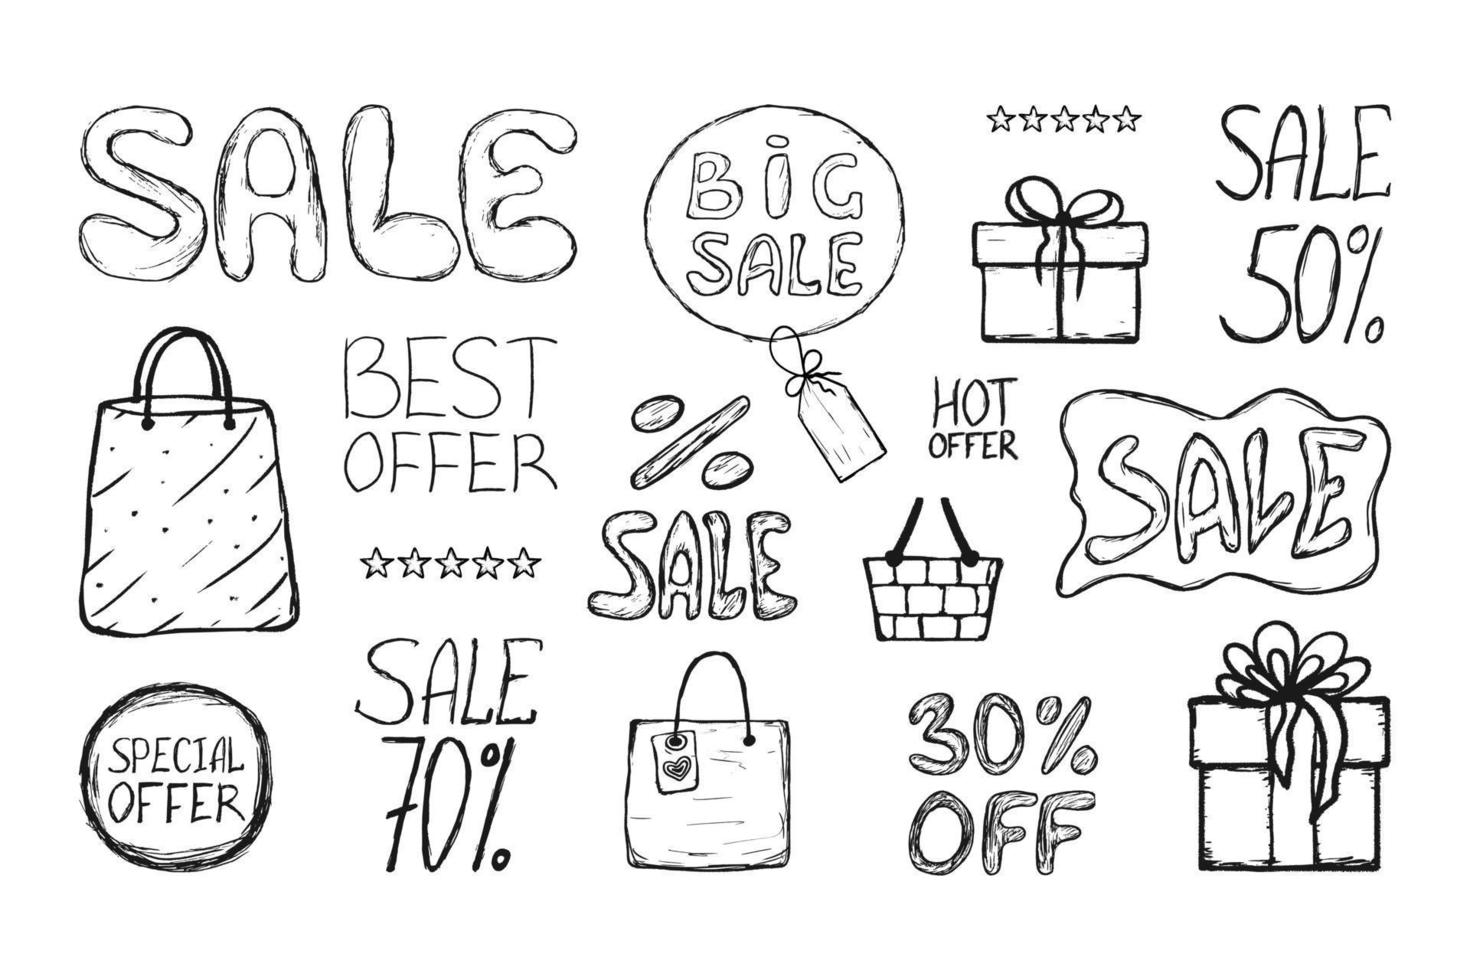 Set of hand drawn doodle sale clipart and lettering. Shopping design elements, banners, badges, price tags, illustrations, handmade calligraphy. Isolated on white background vector